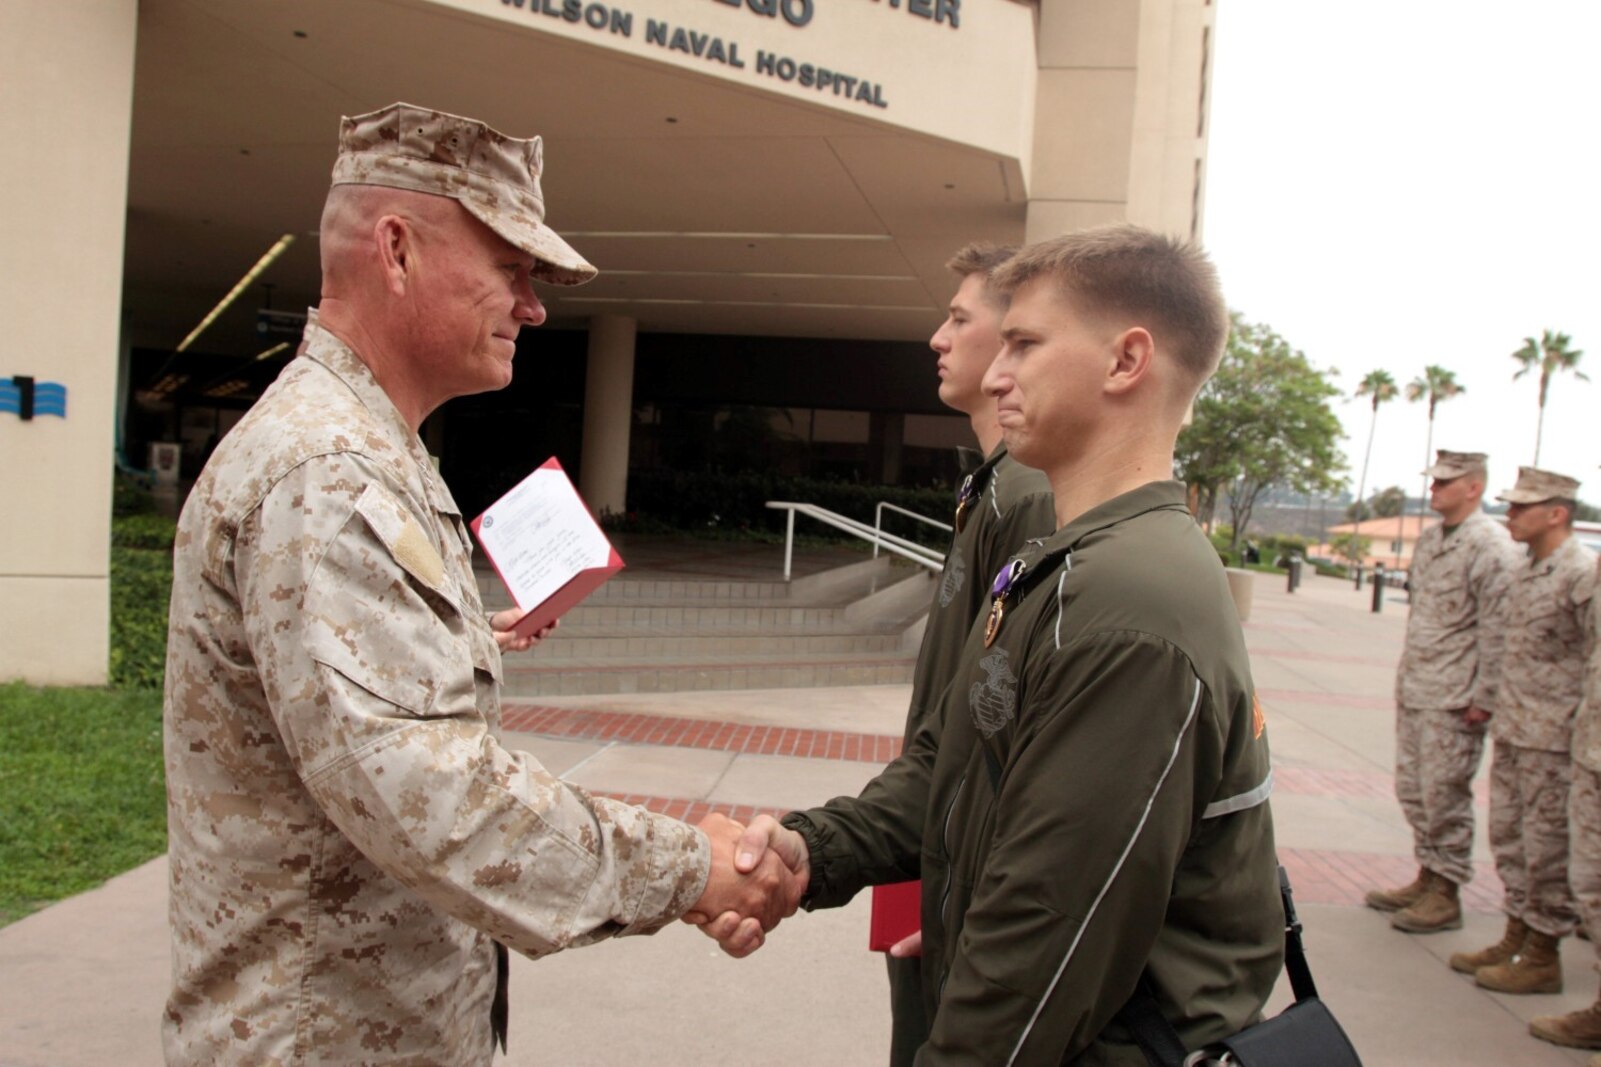 NAVAL MEDICAL CENTER SAN DIEGO, Calif. – Major Gen. Lawrence D. Nicholson, 1st Marine Division commanding general, congratulates Lance Cpl. Justin R. Beer, a rifleman temporarily assigned to Wounded Warrior Battalion West, after presenting the Purple Heart during an award ceremony here, July 31, 2013. Beer, a native of Bushnell, Ill., was wounded by enemy sniper fire, May 27, 2013, while deployed with 3rd Battalion, 4th Marine Regiment, to Musa Qal’ah district, Helmand province, Afghanistan, in support of Operation Enduring Freedom. Beer is a 2010 graduate of Bushnell-Prairie City High School.
(U.S. Marine Corps photo by Sgt. Jacob H. Harrer)